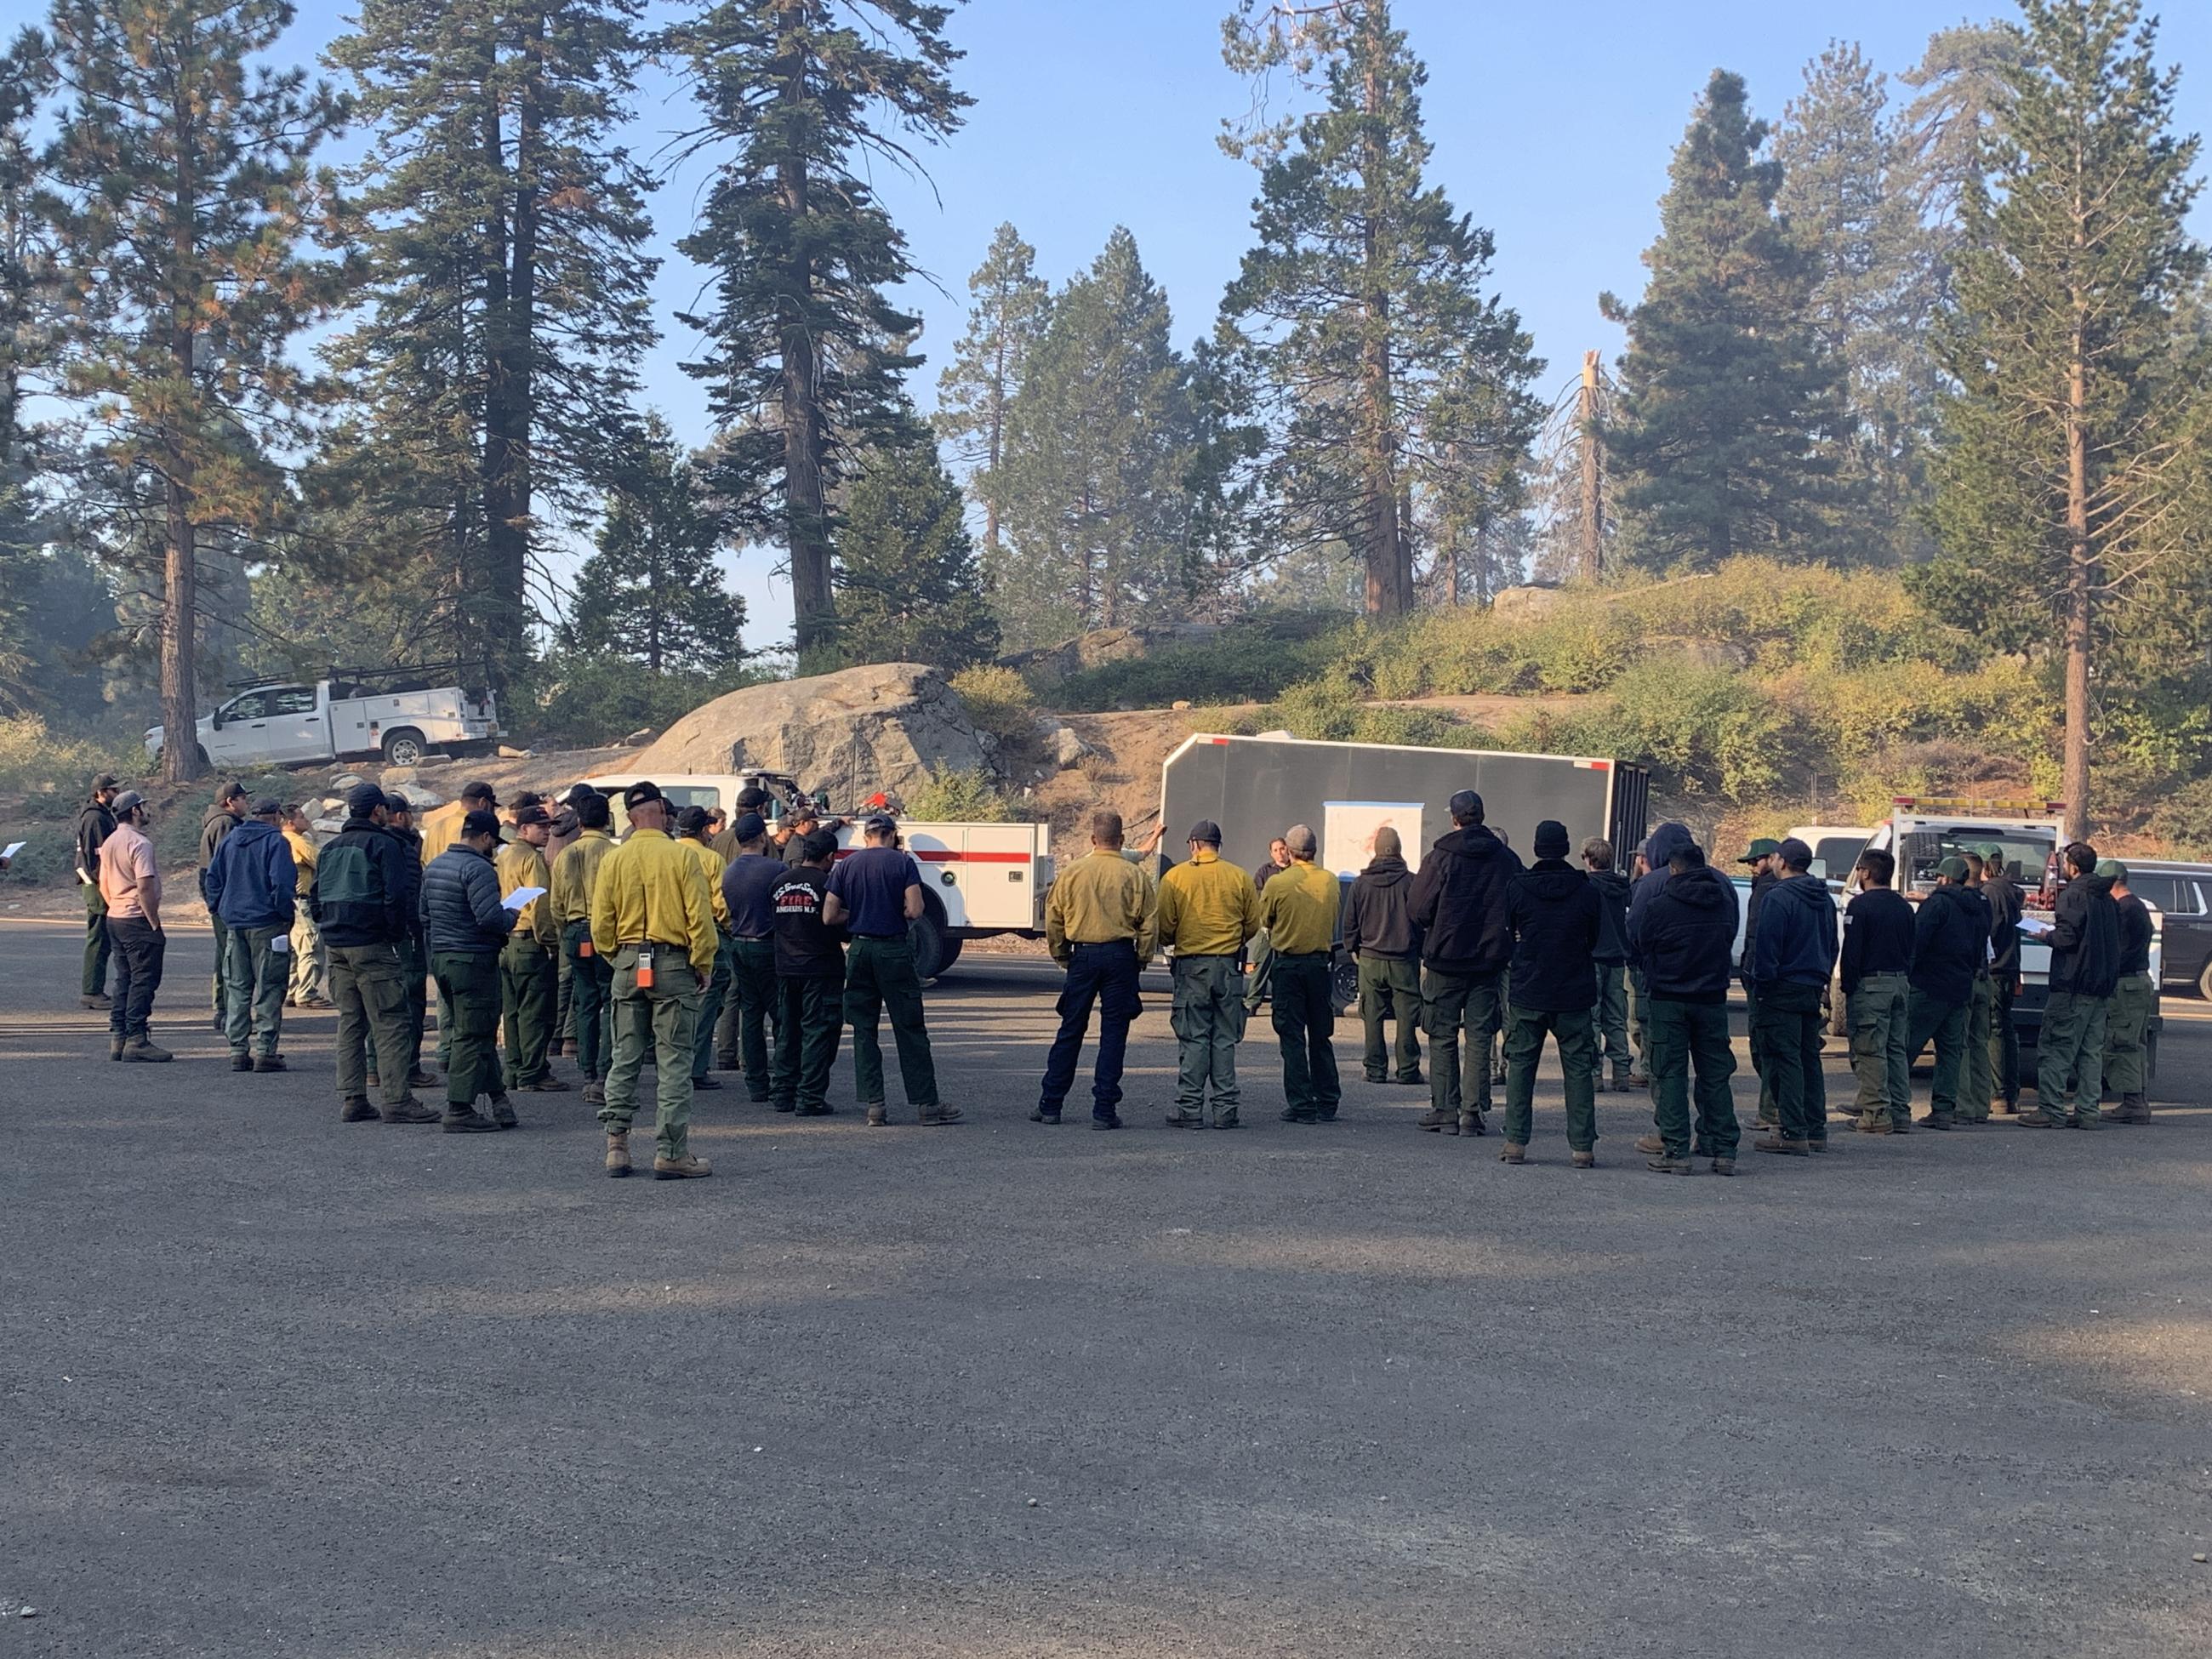 10/19 Briefing on the rabbit fire  